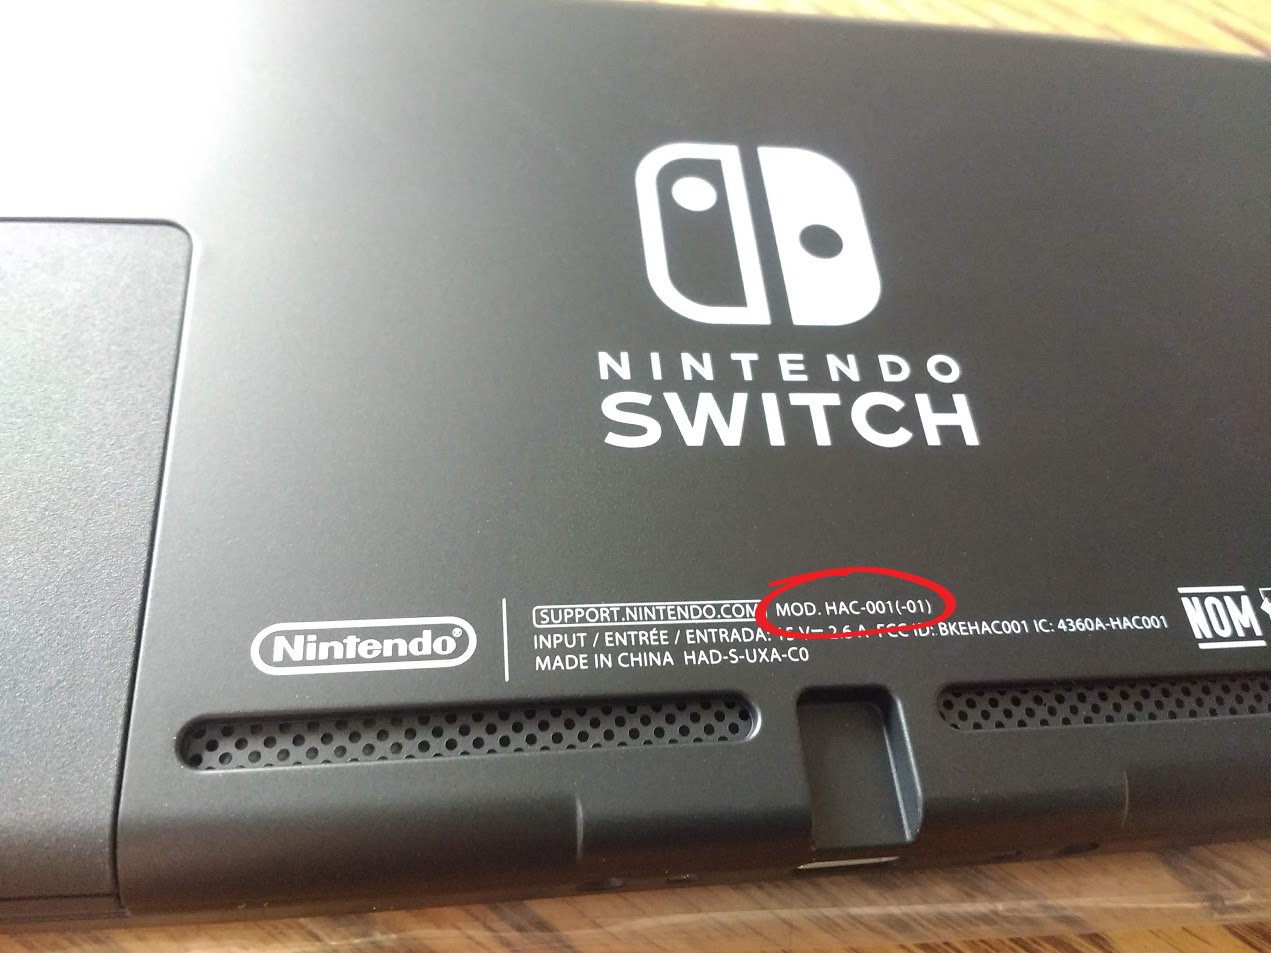 The model number for the new Nintendo Switch V2